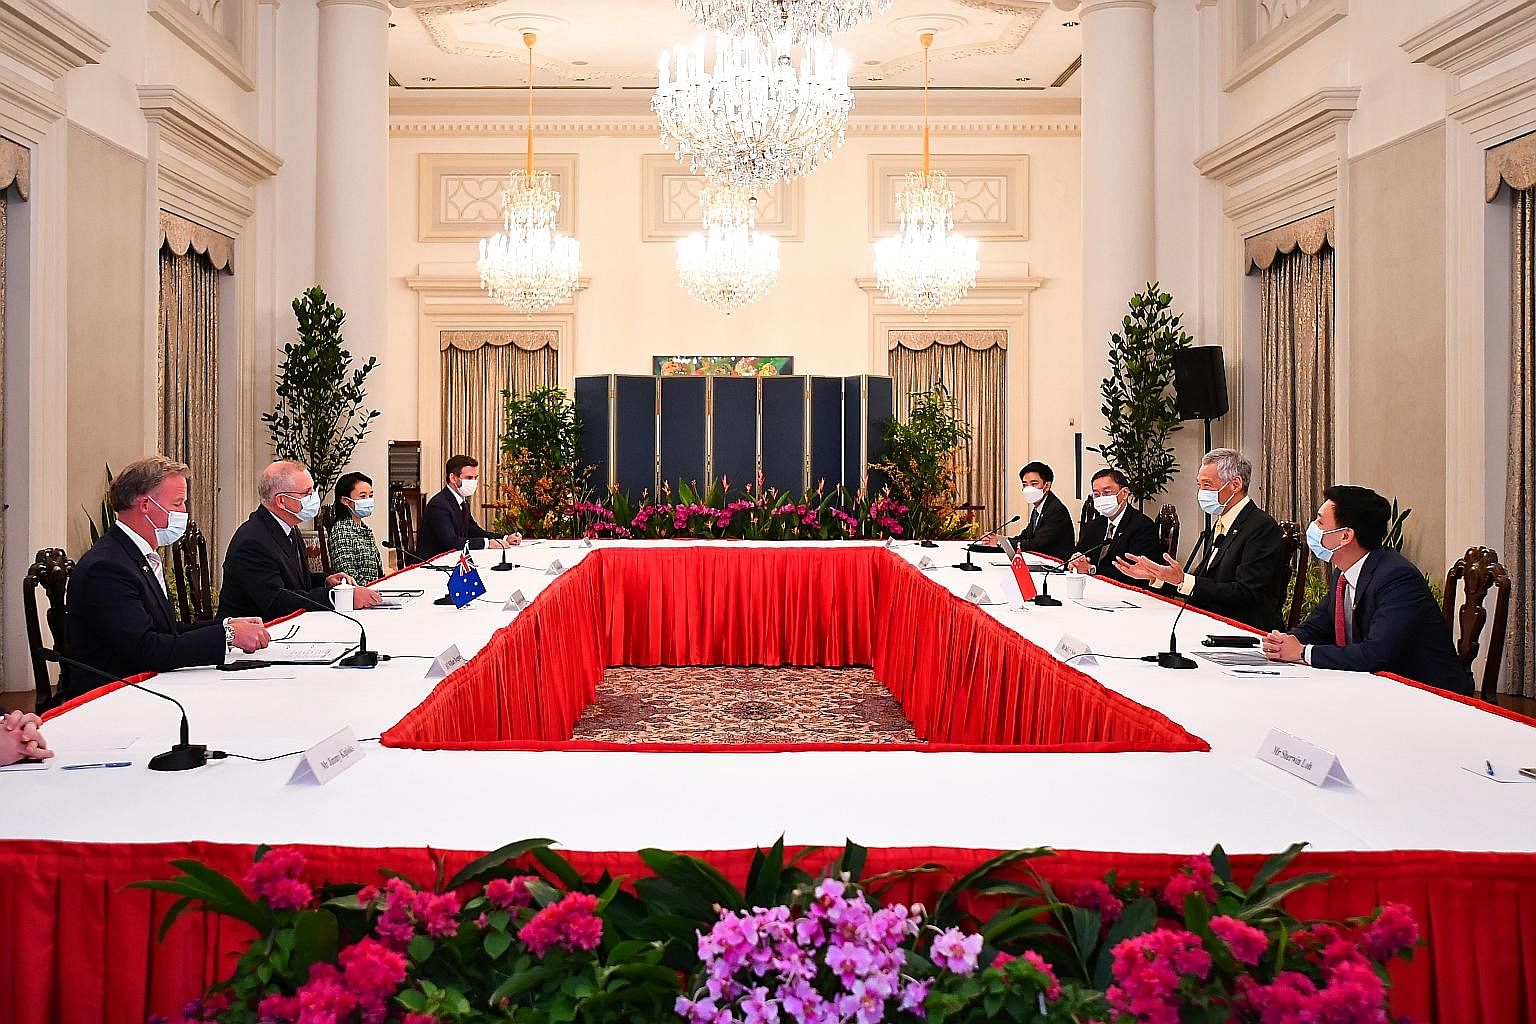 Prime Minister Lee Hsien Loong speaking with Australian Prime Minister Scott Morrison (second from left) at the sixth Australia-Singapore Annual Leaders' Meeting at the Istana yesterday. With them were (from left) Mr William Hodgman, Australia's High